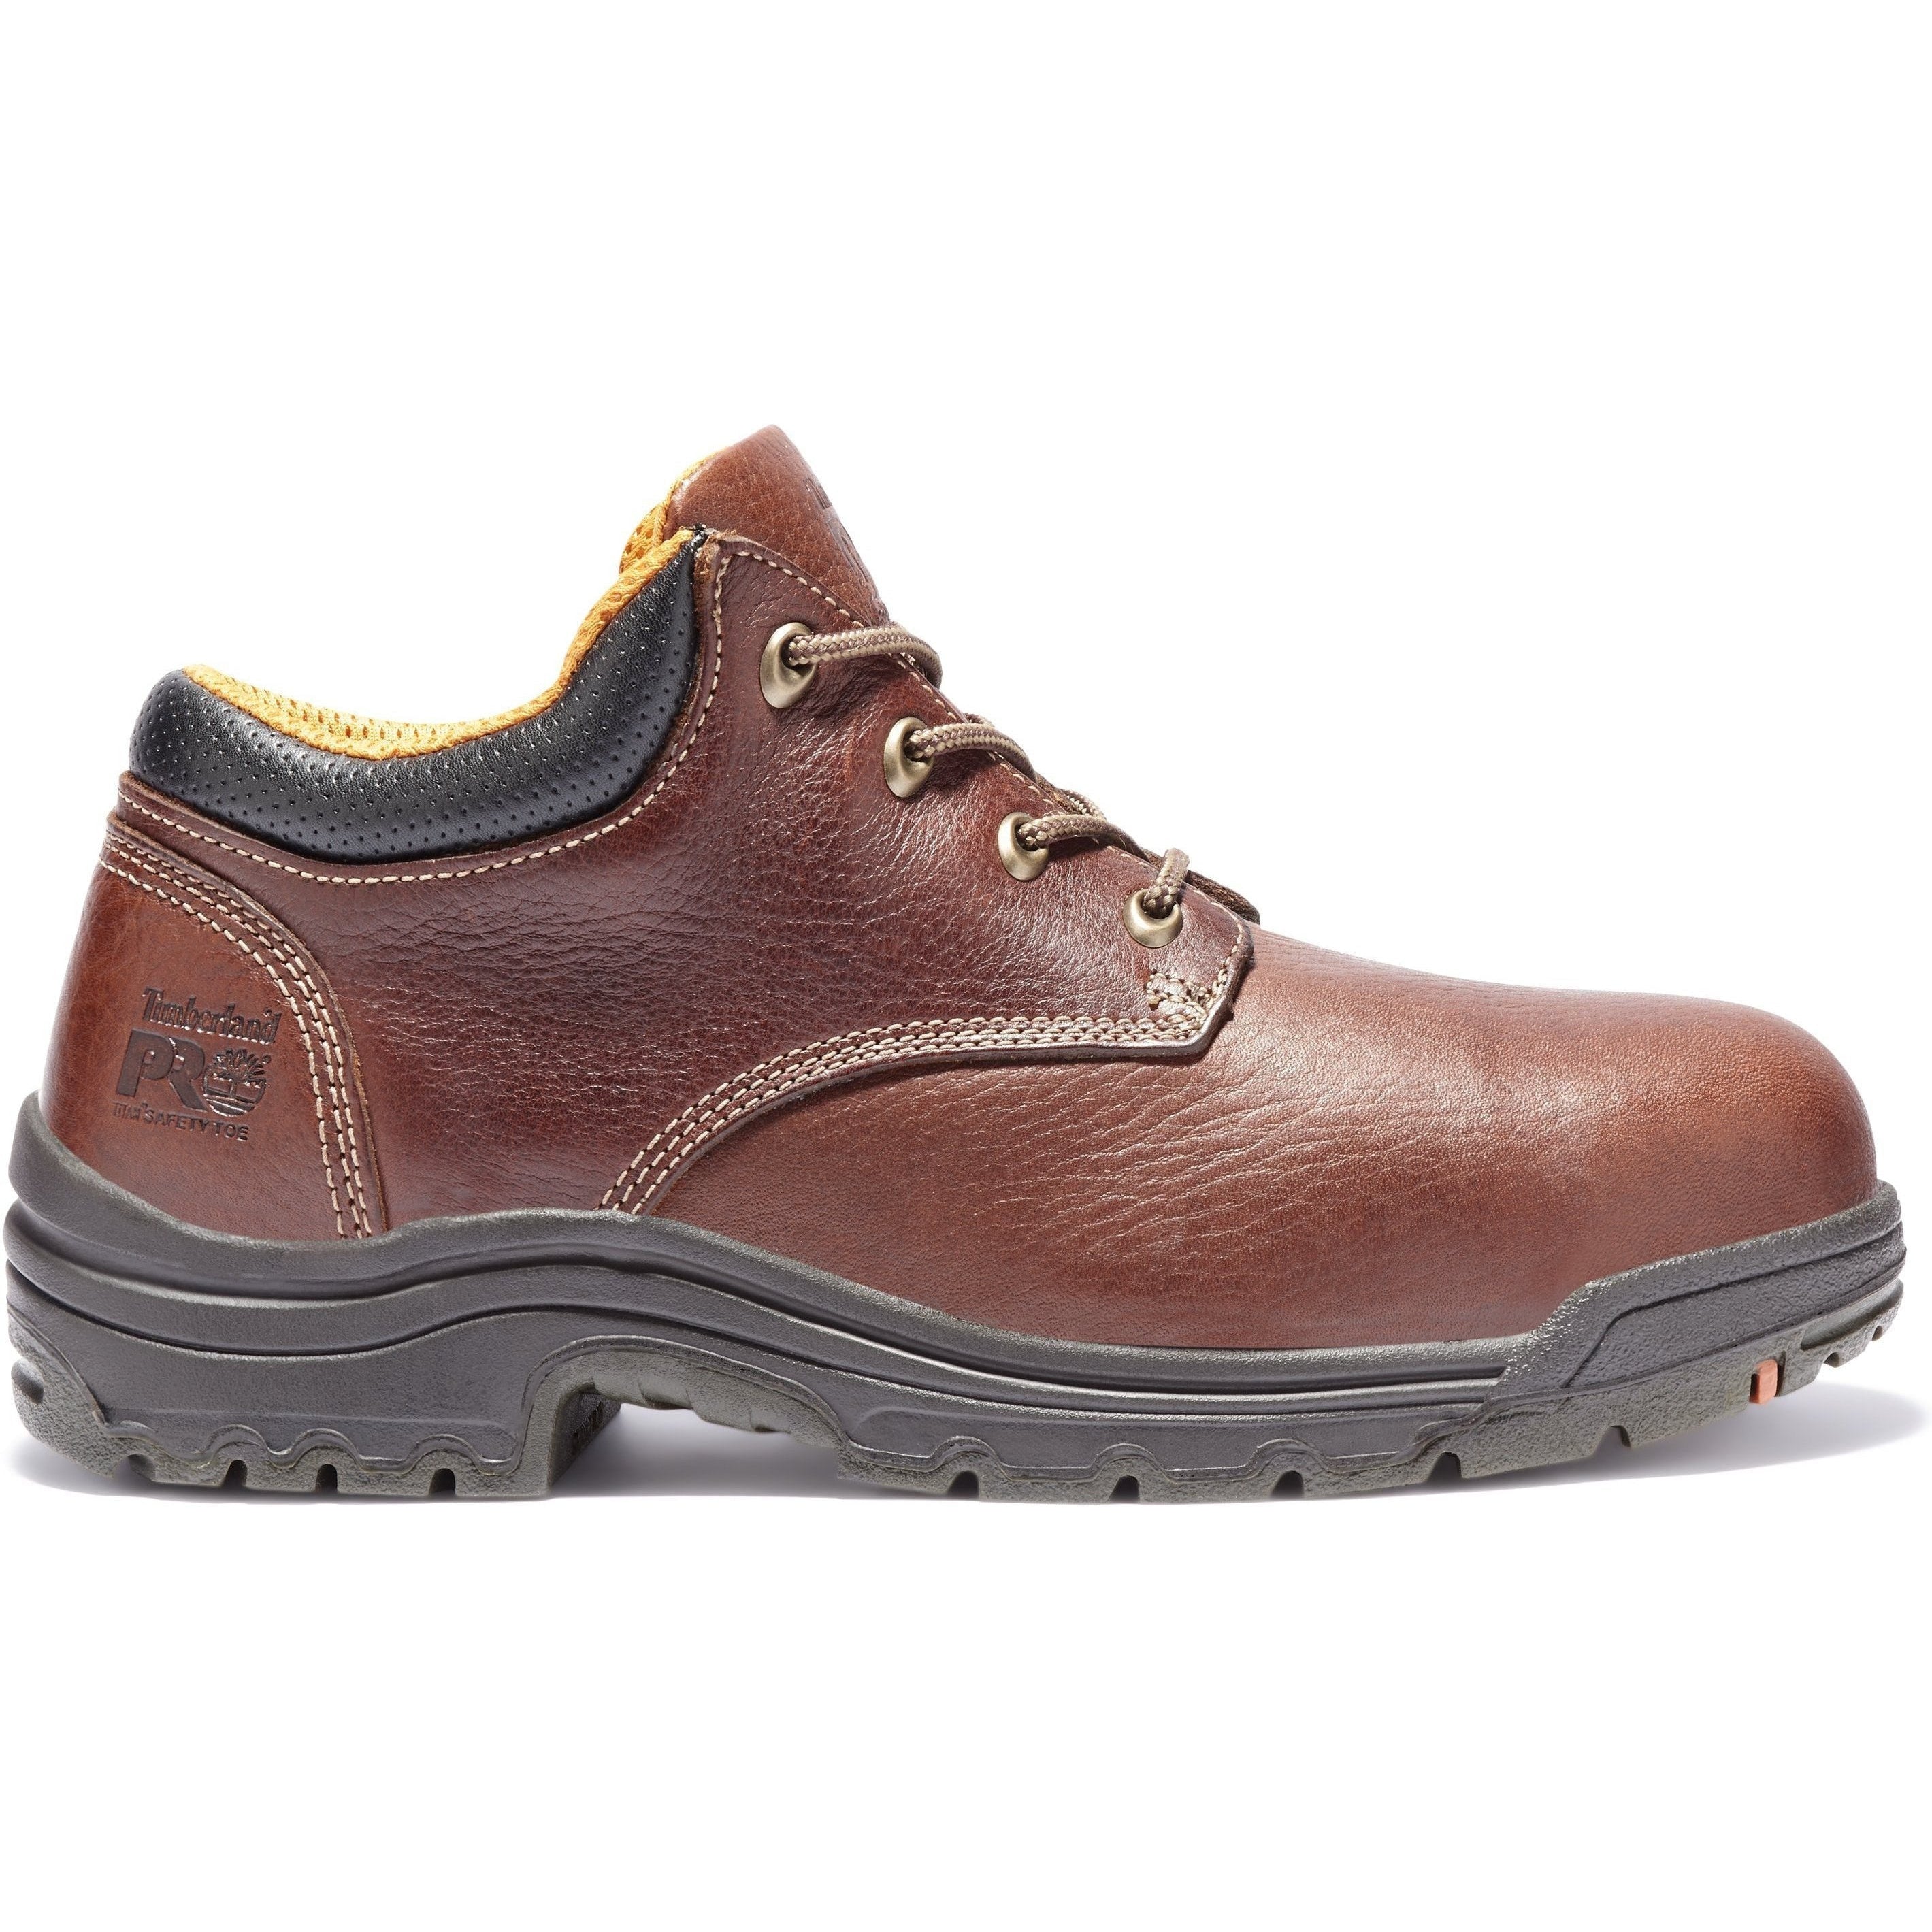 Timberland PRO Men's TiTAN Oxford Alloy Toe Work Shoe Brown TB147028210  - Overlook Boots